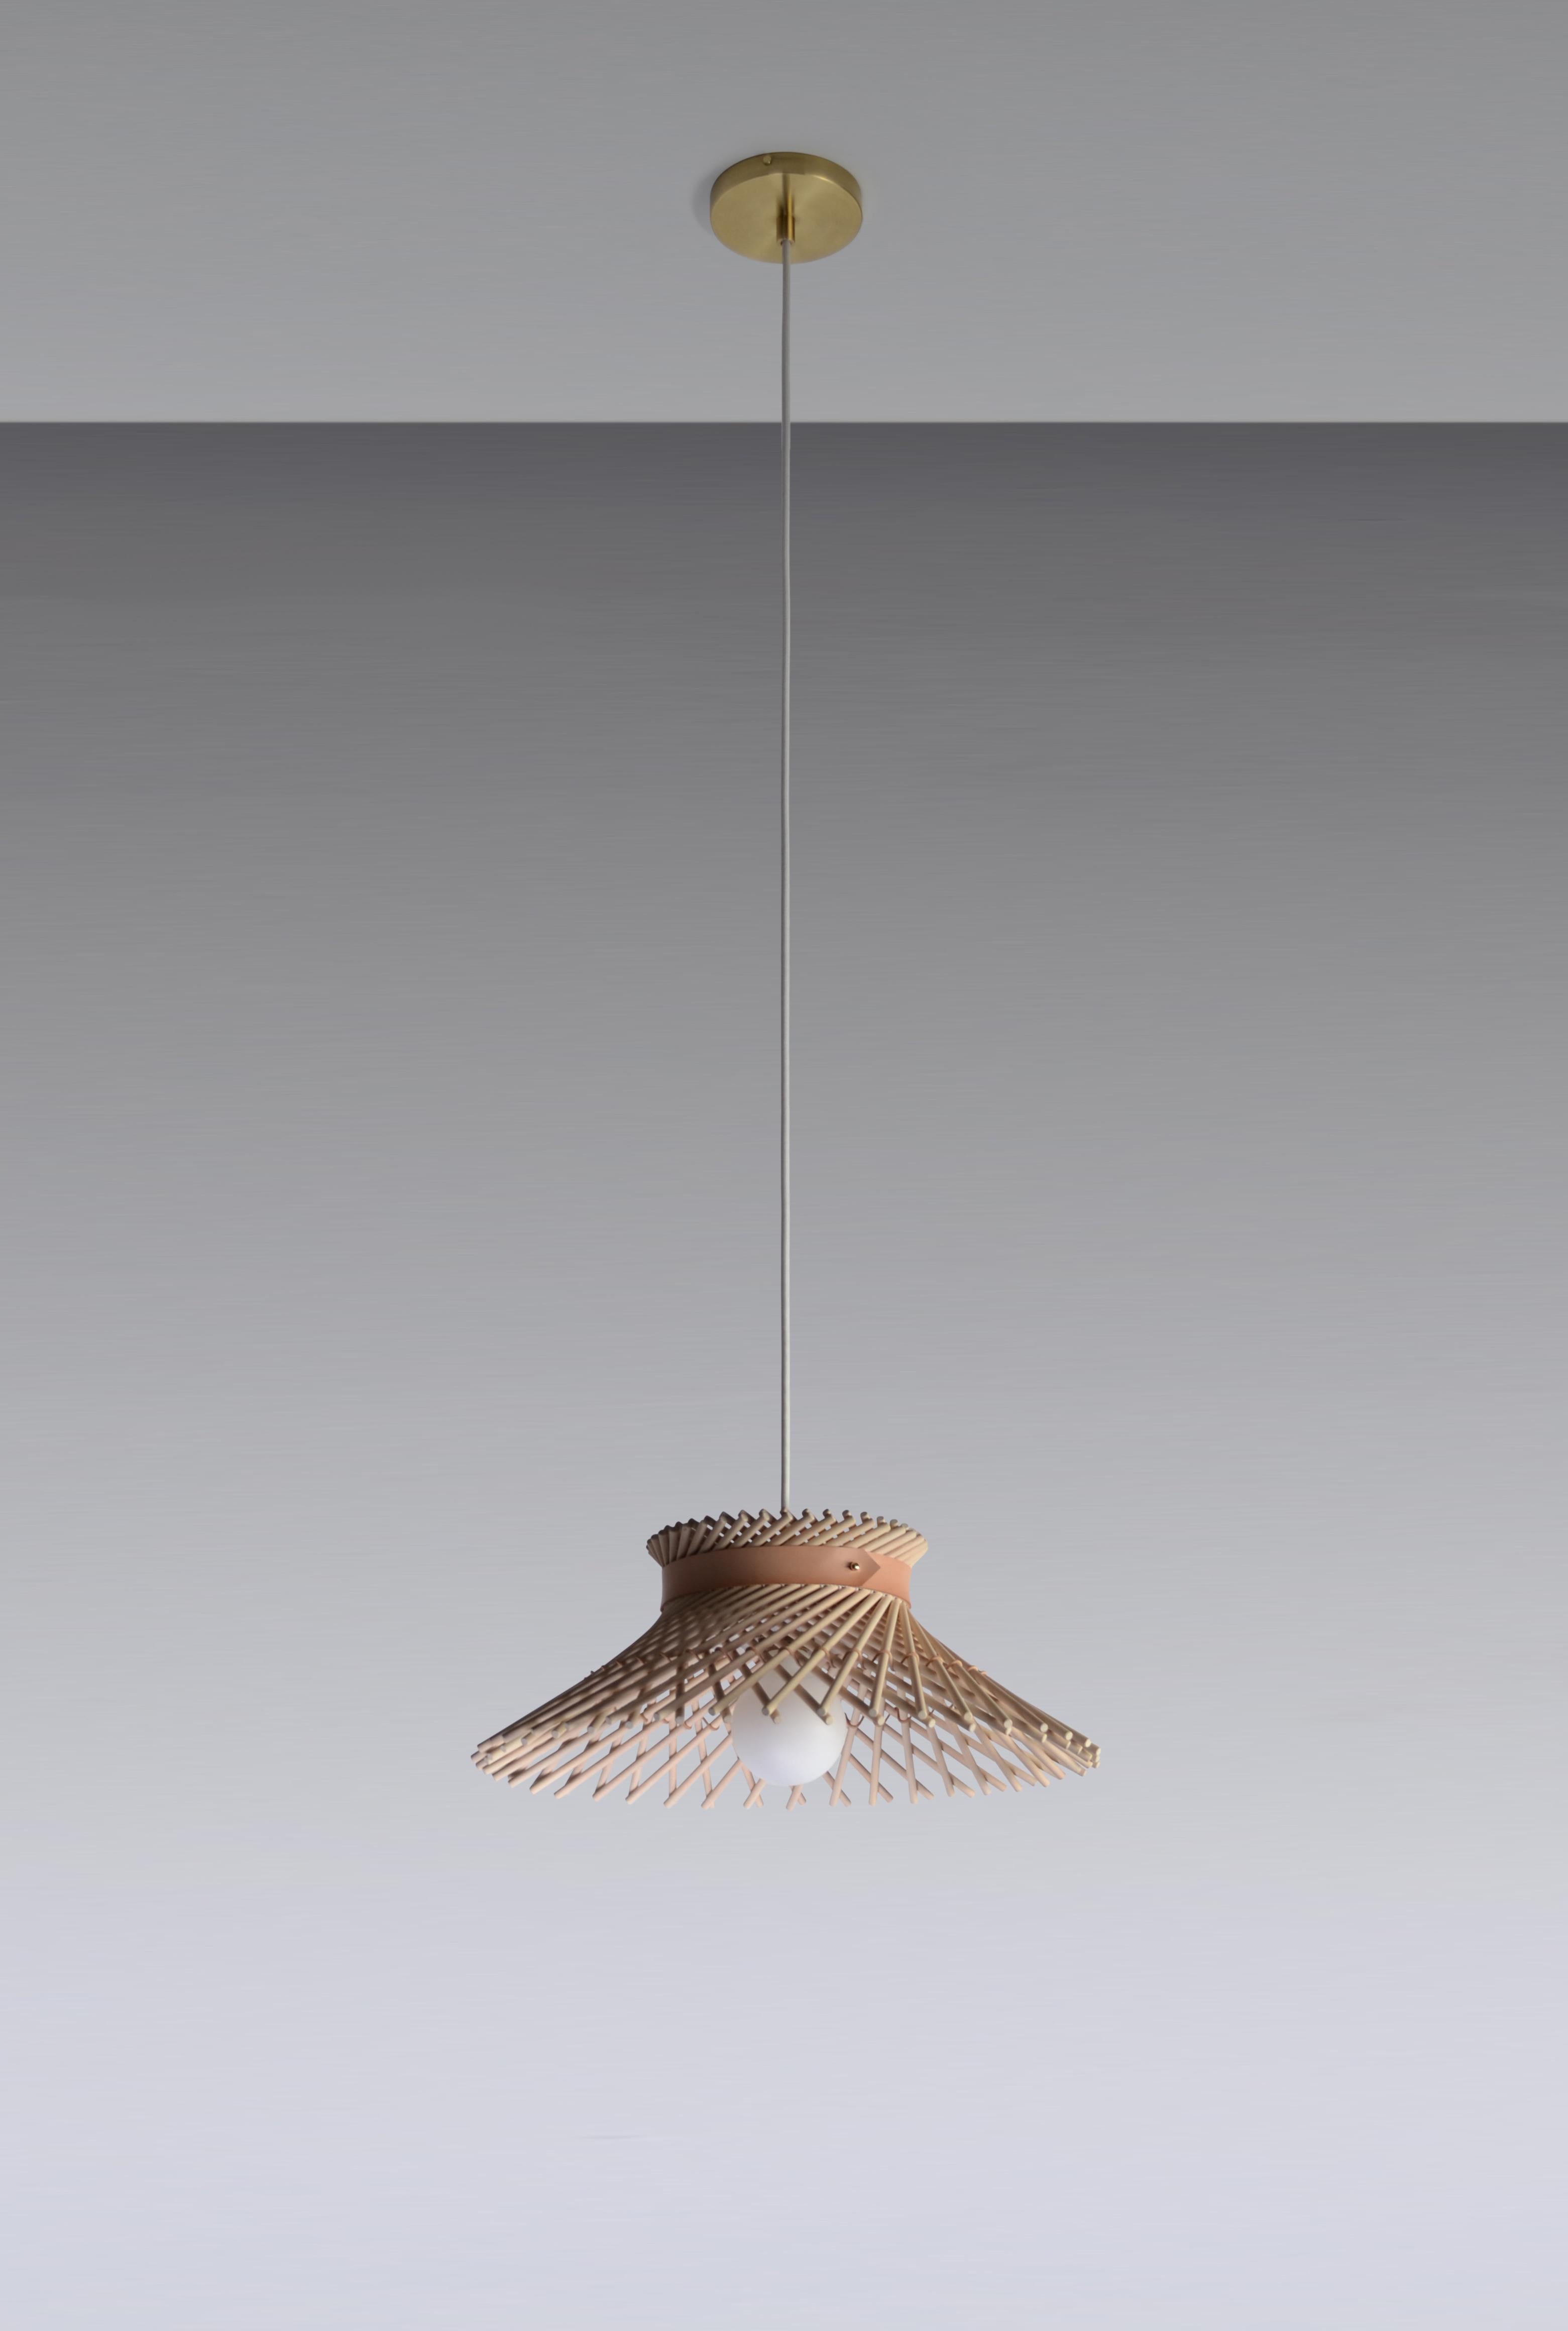 Mooda Natural Maple pendant 6 by Indo Made
Dimensions: Ø 41.9 x H 17.8 cm (Suspension height is made to specification)
Materials: Natural Maple, Mugla White stone

All our lamps can be wired according to each country. If sold to the USA it will